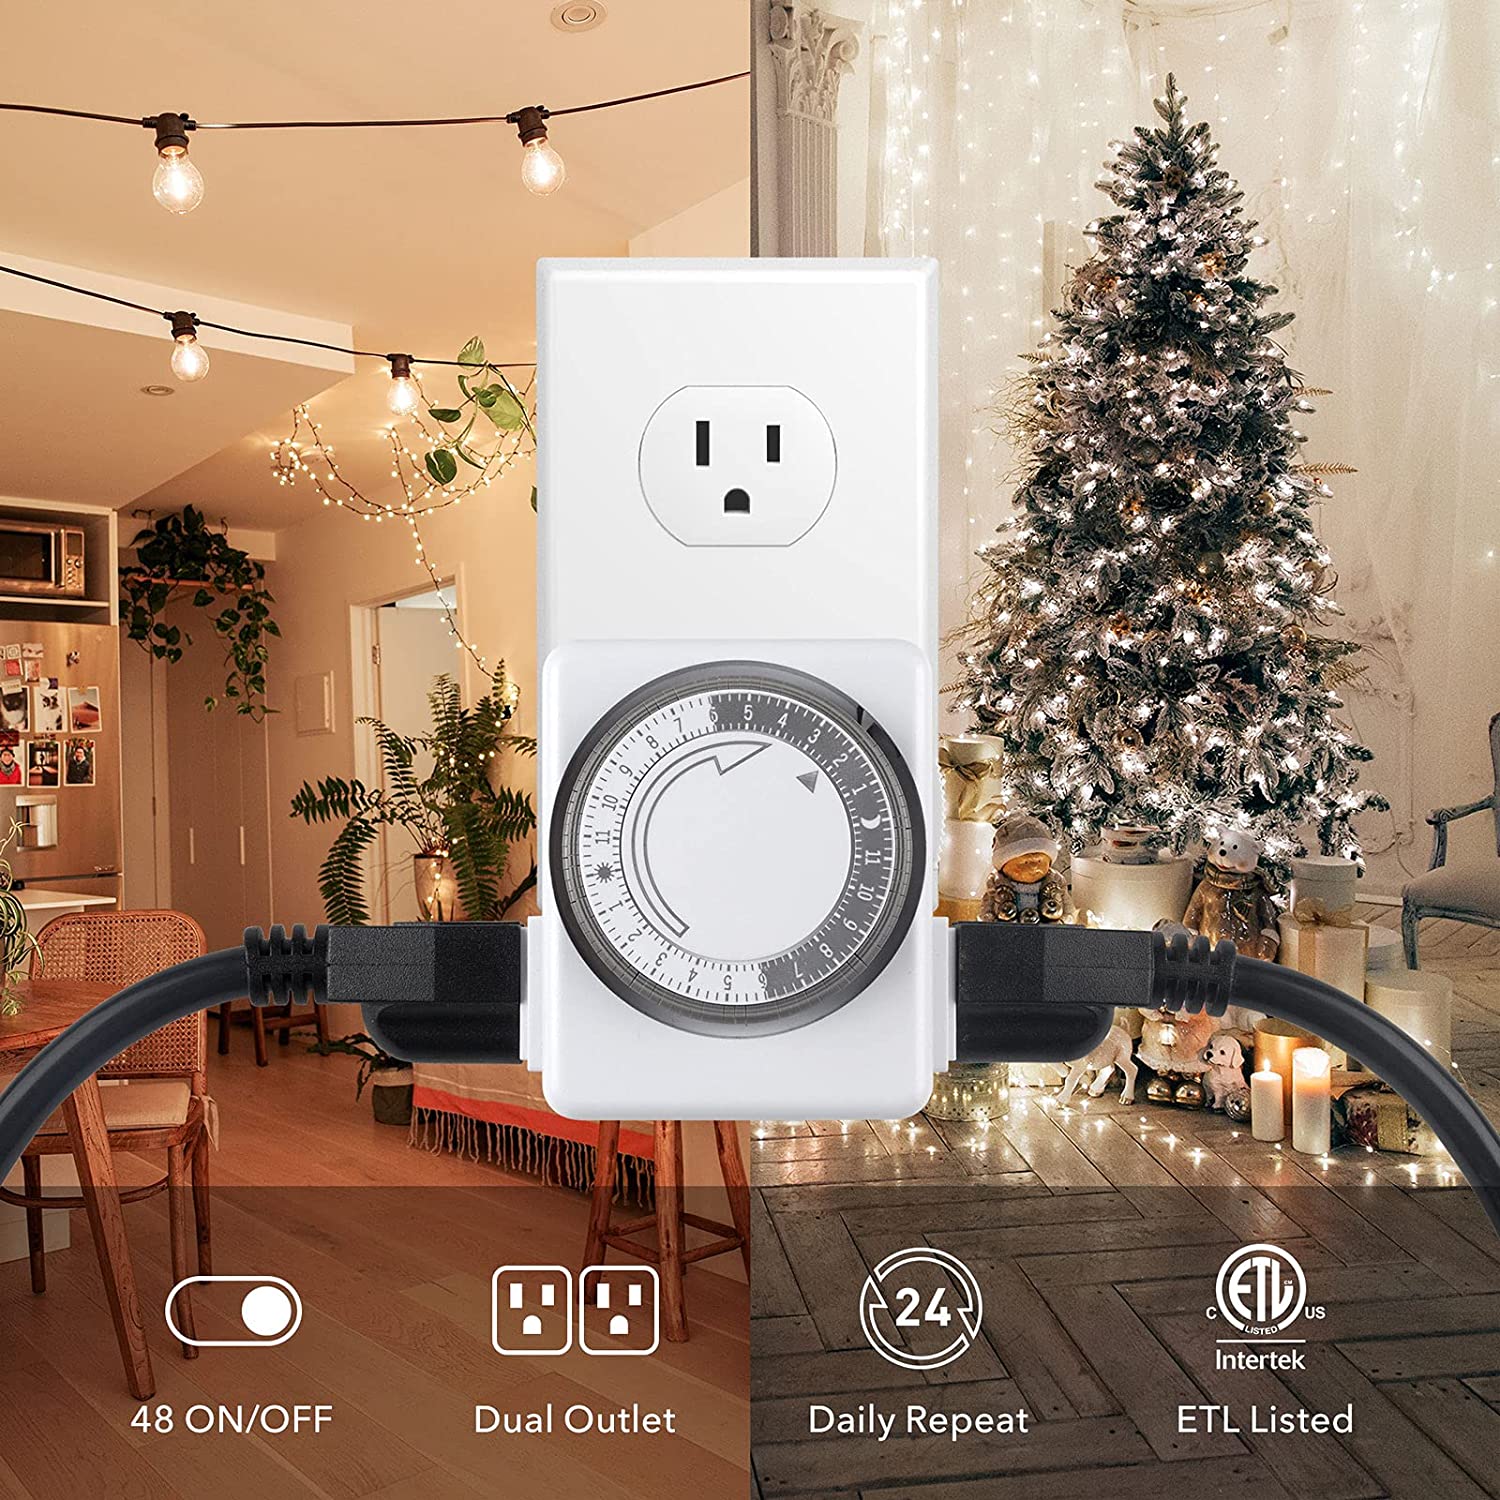 Indoor Timer-24 Hour Plug-in Dual Mechanical Heavy Duty Daily On/Off Cycle (2 PACK) BN-LINK - BN-LINK